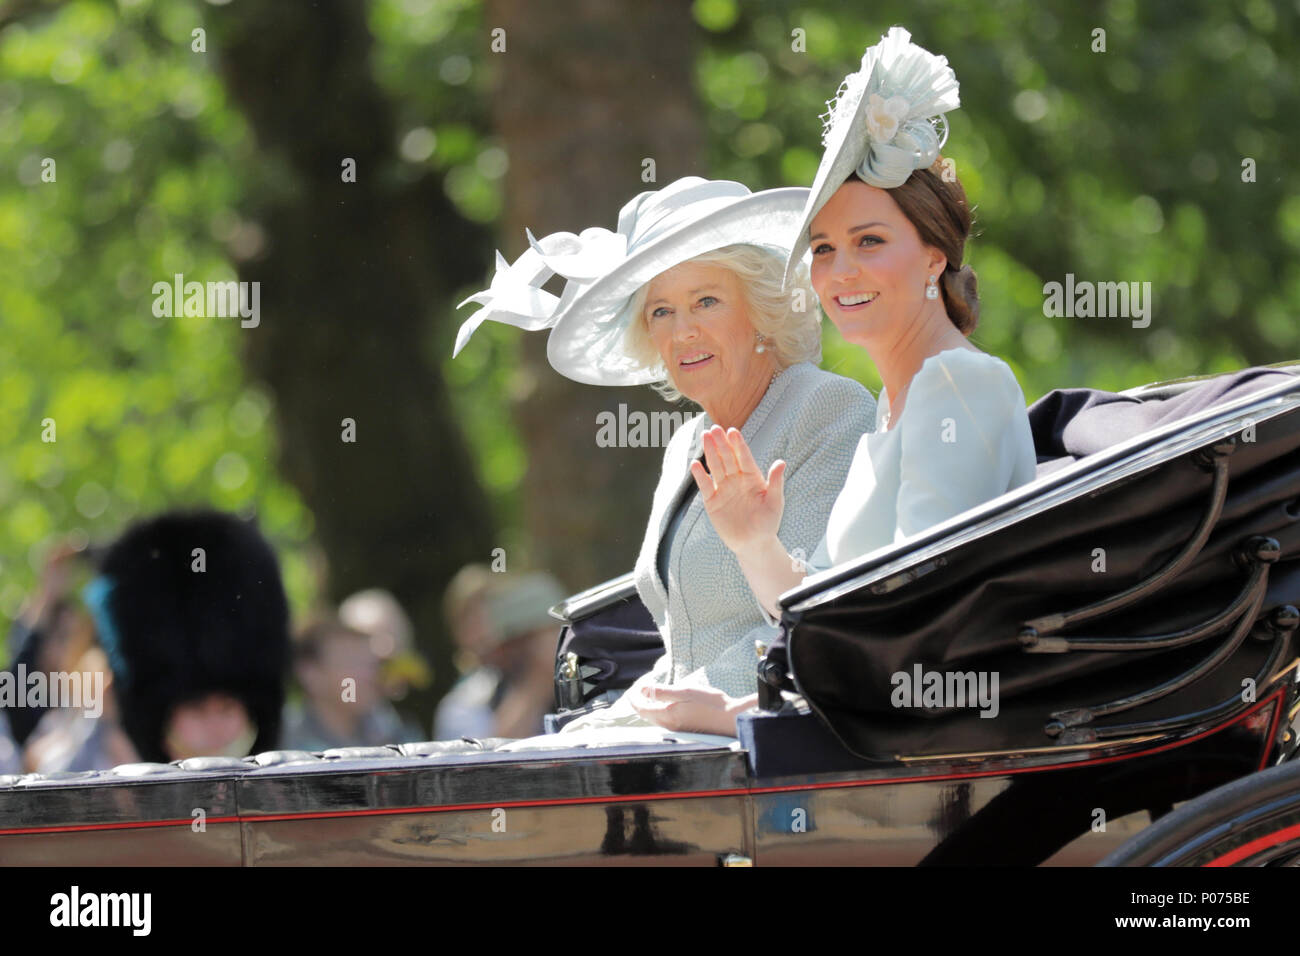 London, UK, 9 June 2018. HRH Catherine, Duchess of Cambridge and Camilla, Duchess of Cornwall ride a horse drawn carriage in the procession along The Mall, Trooping the Colour Credit: amanda rose/Alamy Live News Stock Photo